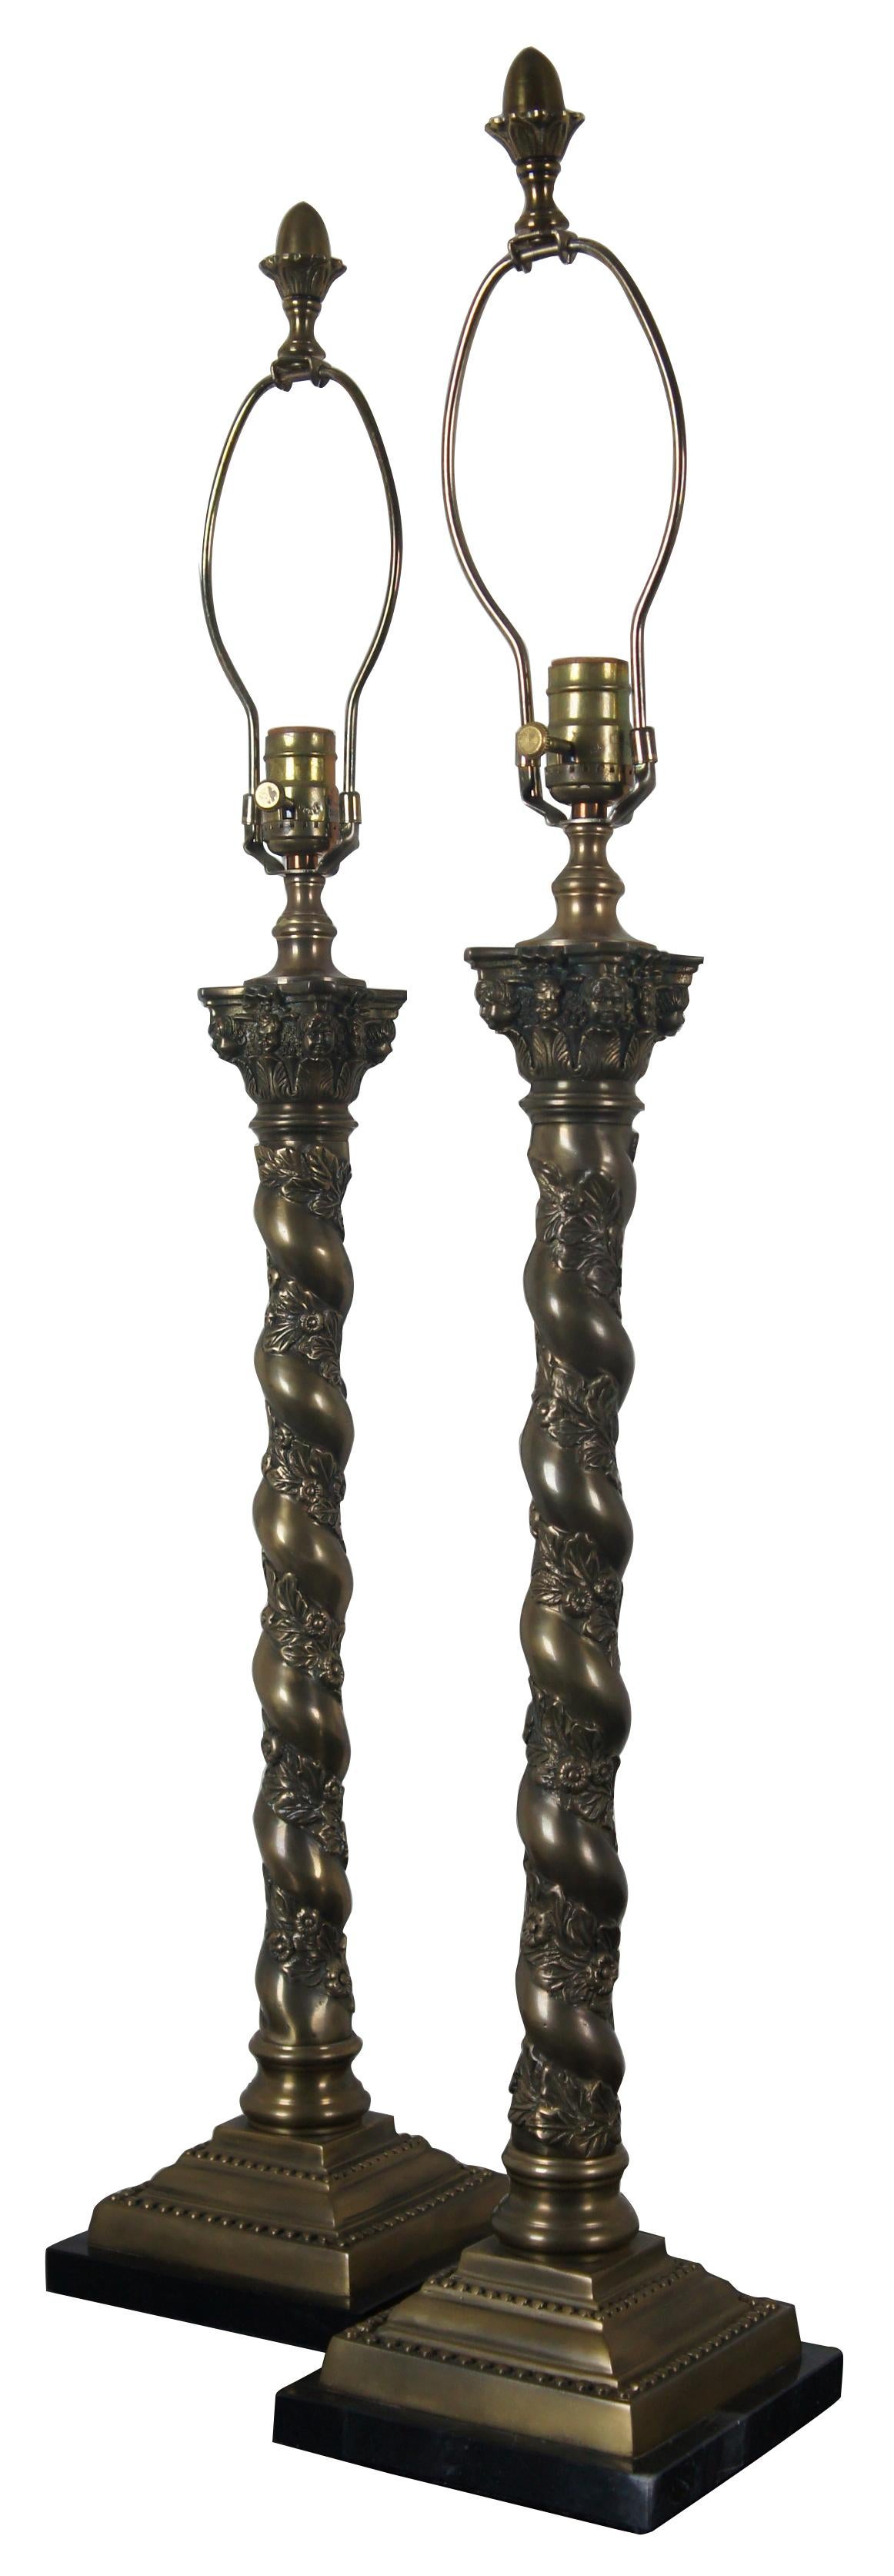 Vintage bronze barley twist lamp pair attributed to Theodore Alexander. Features Corinthian columns with cherubs or pooties on marble base with acorn finials and floral motif. Very heavy. Measures: 37”.